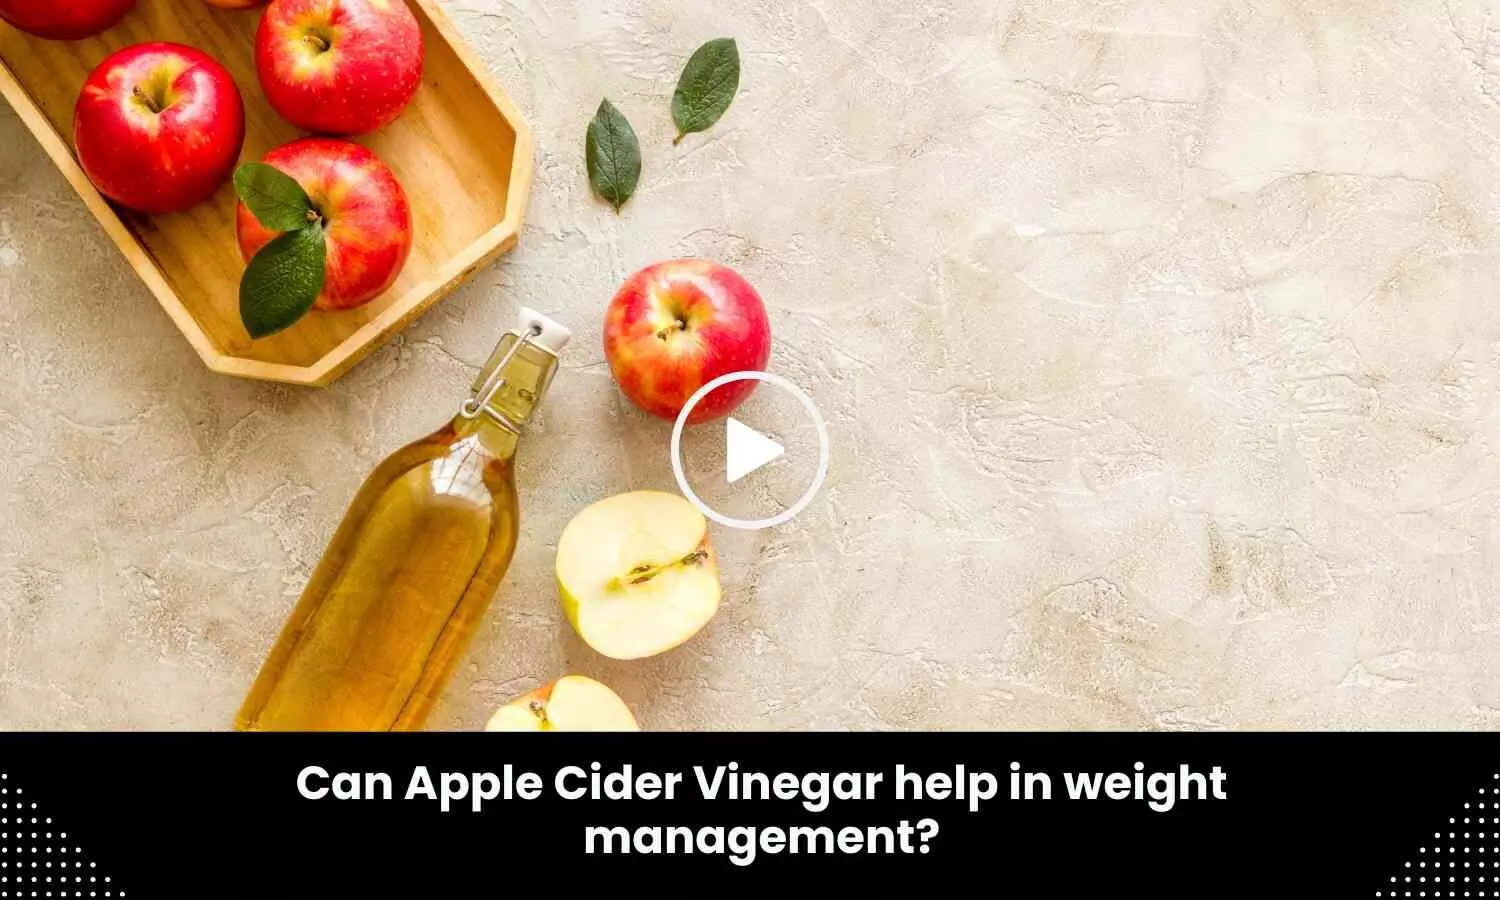 Can Apple Cider Vinegar help in weight management? Research finds out